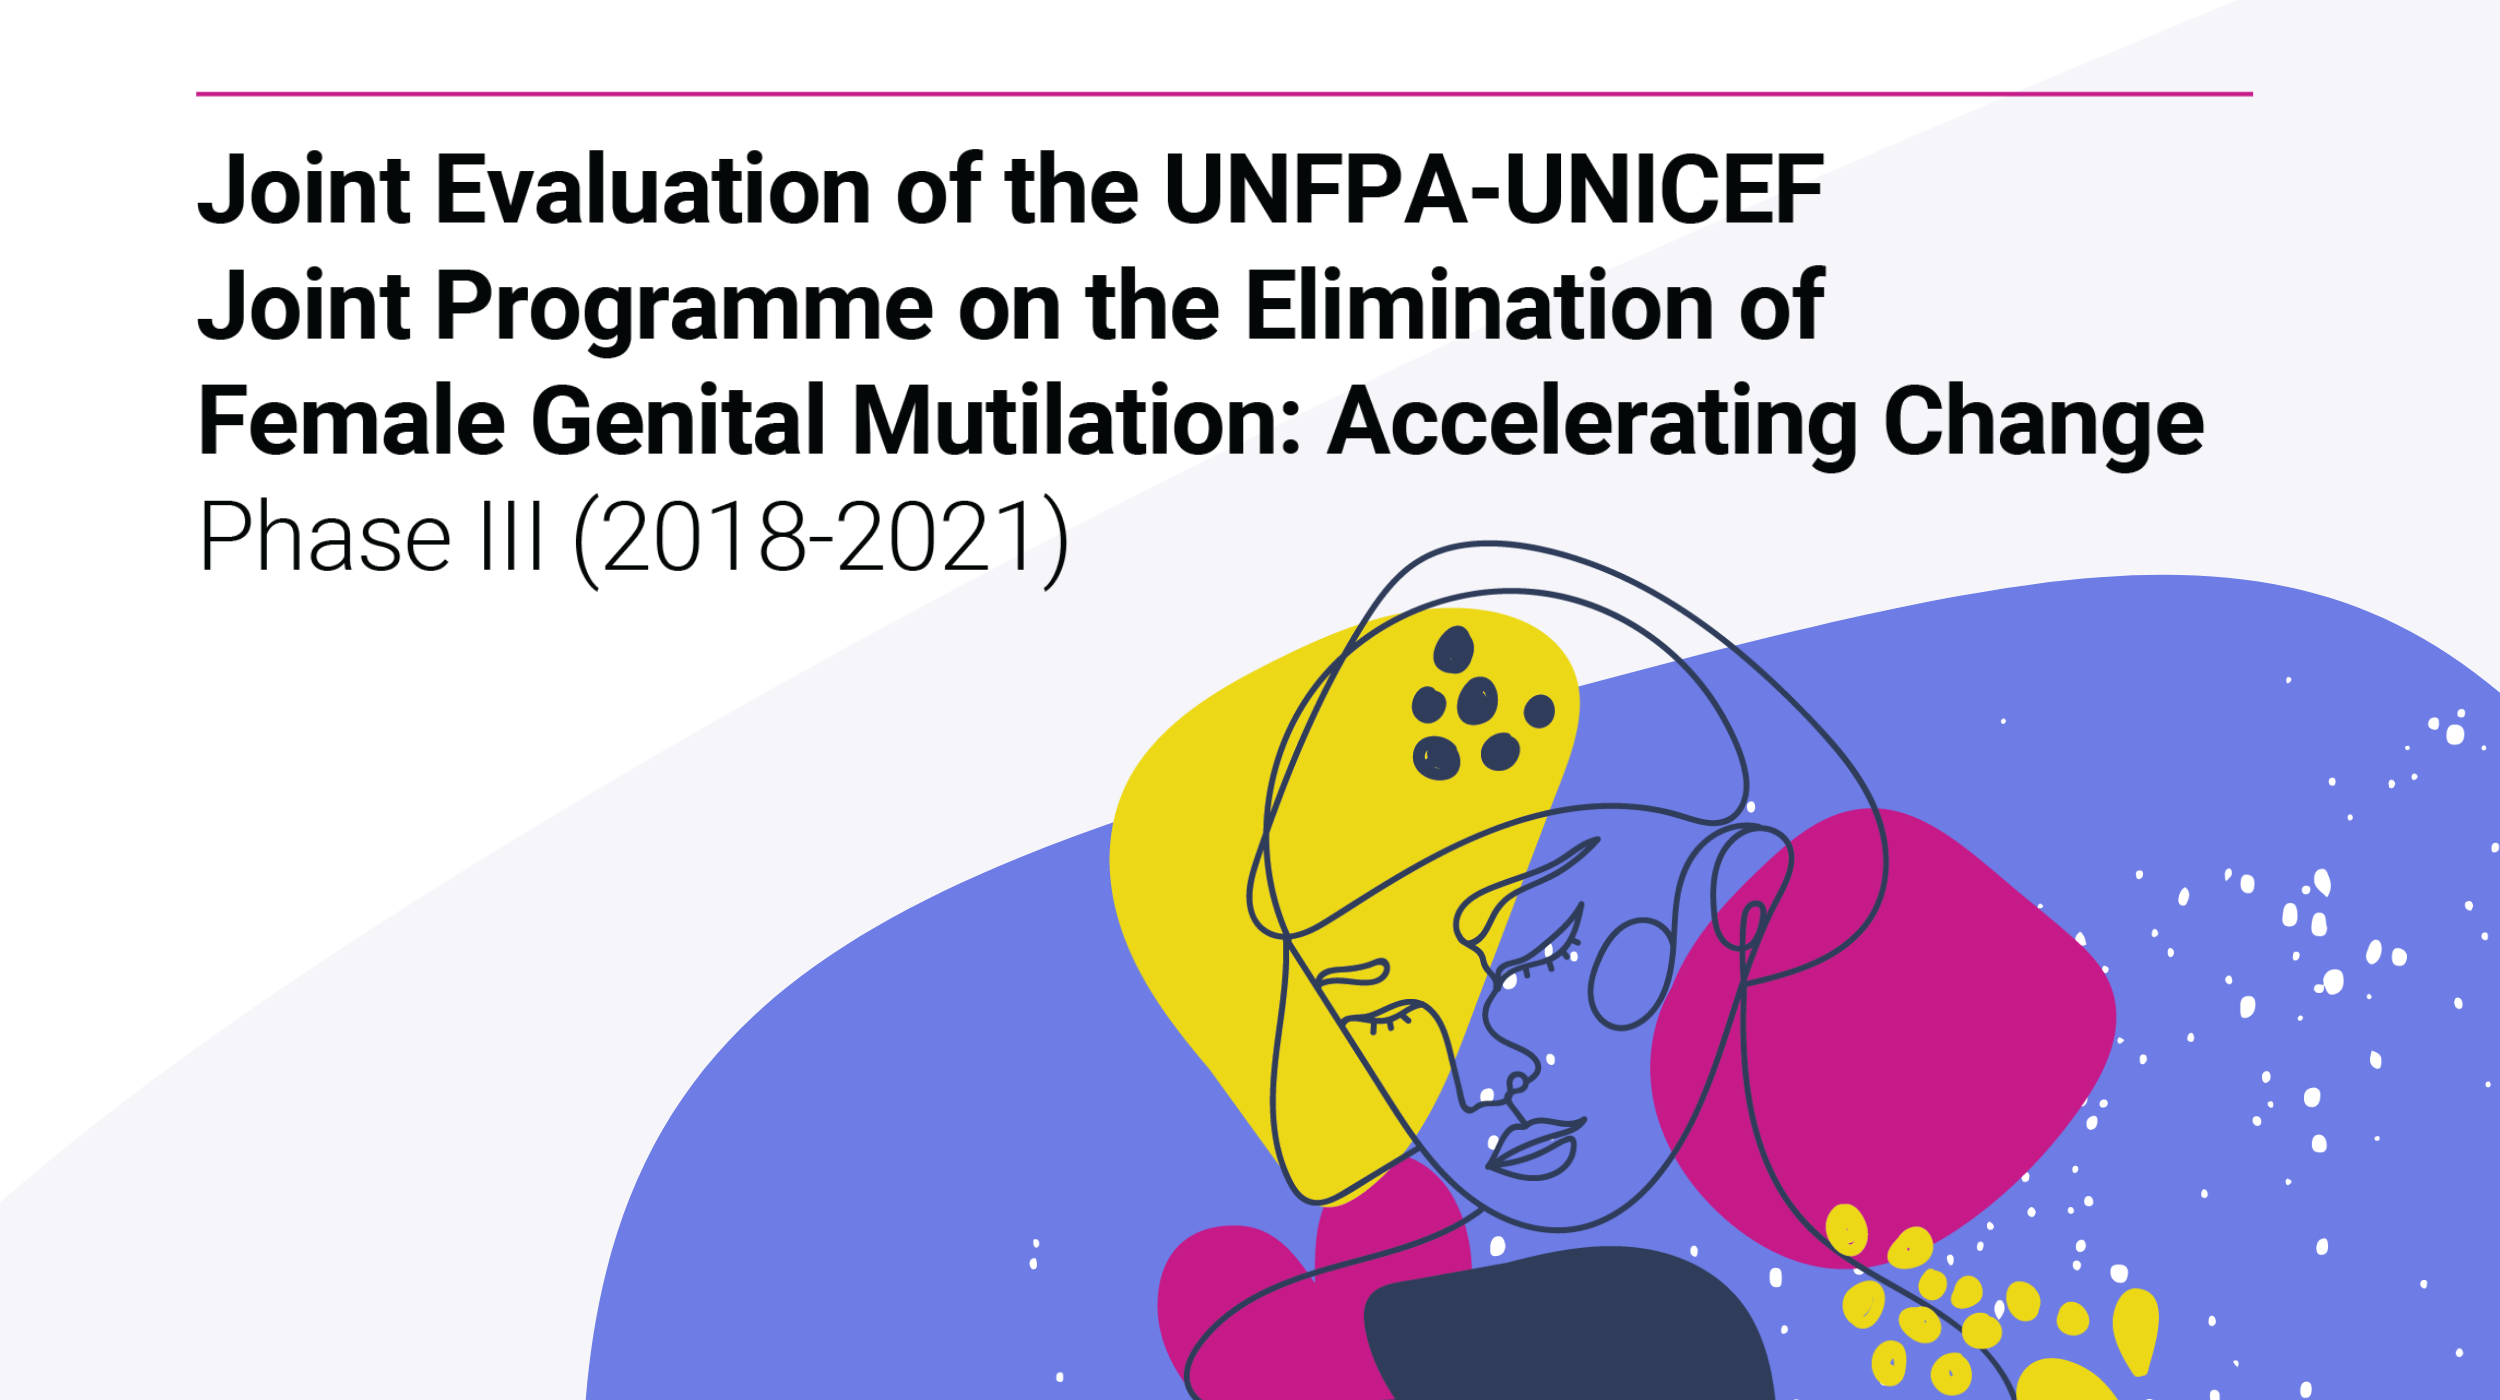 Joint evaluation of the UNFPA-UNICEF Joint Programme on the Elimination of Female Genital Mutilation: Accelerating Change Phase III (2018-2021)